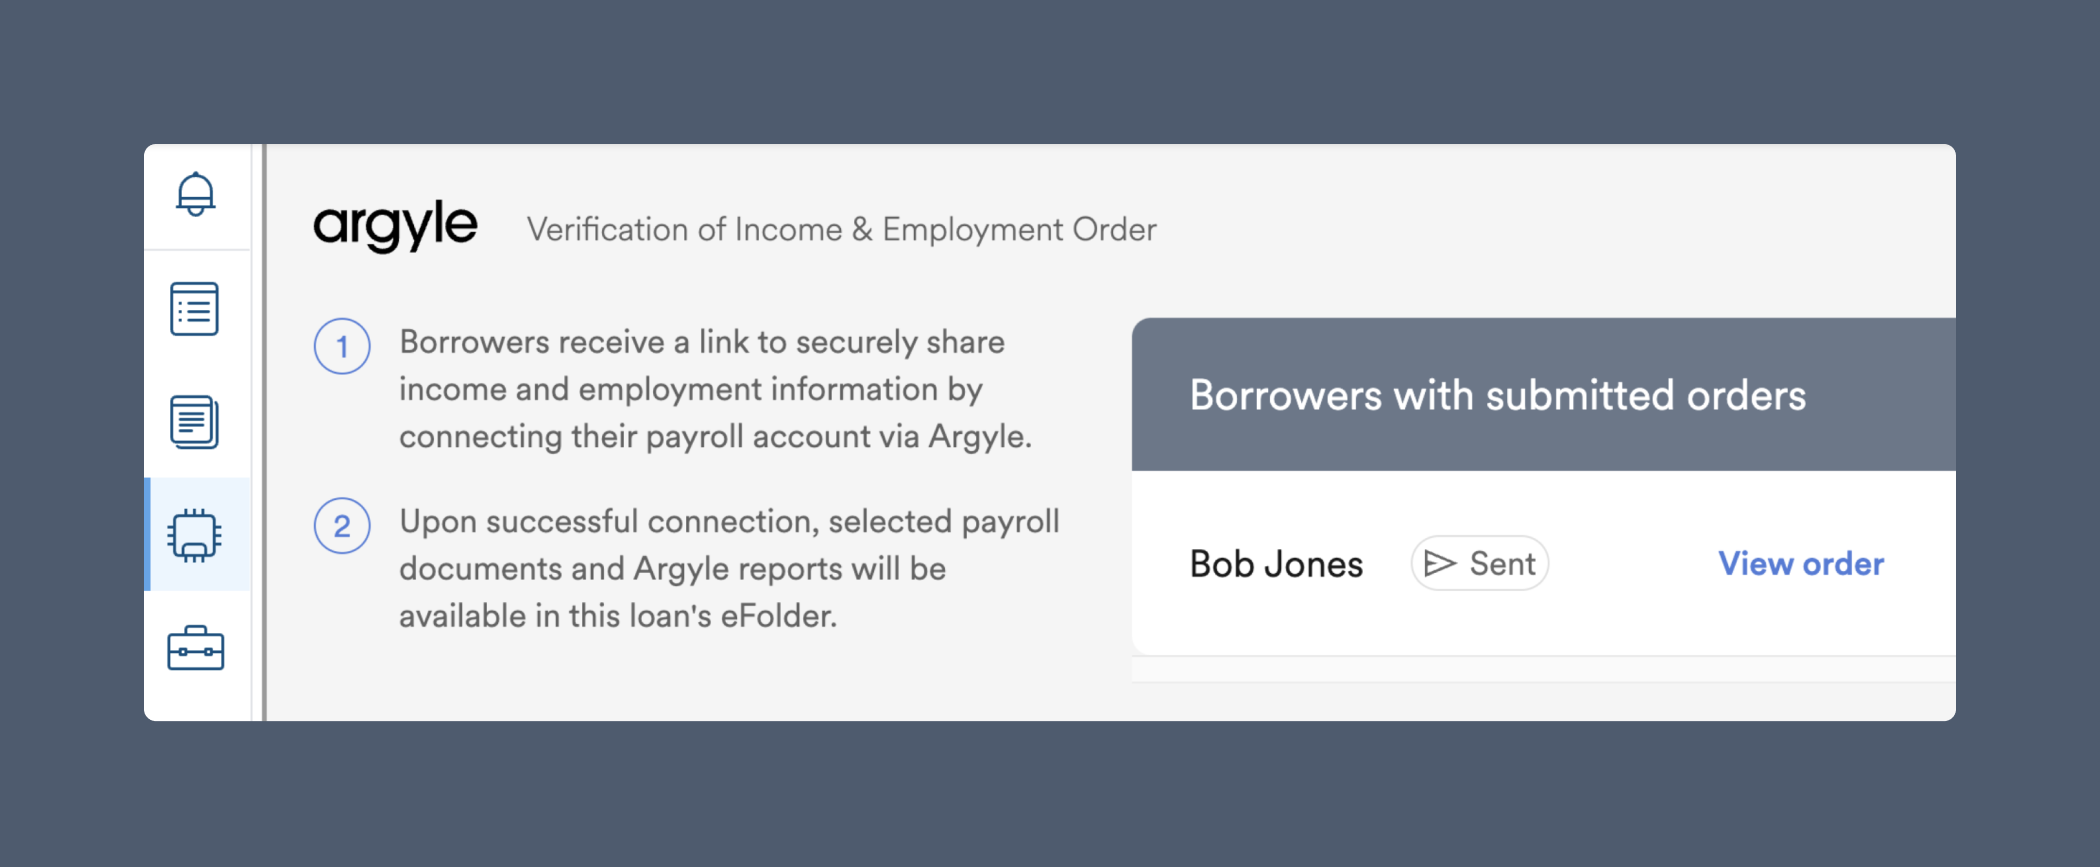 Until a borrower attempts or successfully connects their payroll account, they will have a Sent status.